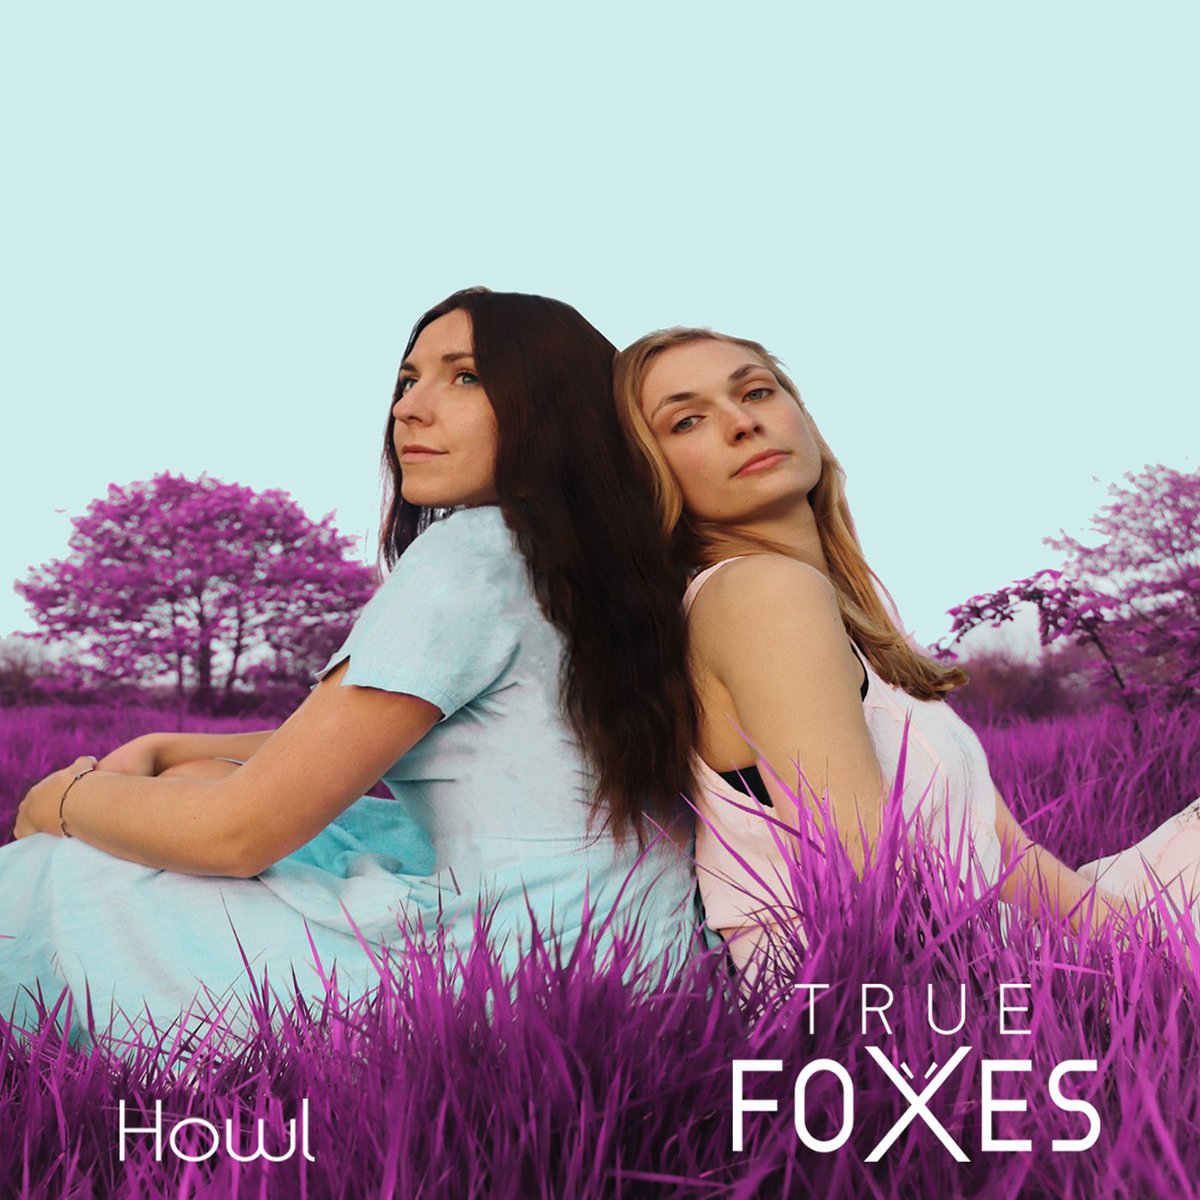 Thank you @AlanCackett for your lovely review of our upcoming album 'Howl' out on Friday!
'Swaying between the dichotomy of fairytale romance and crippling pain brought on by disillusioned dreams...'
Read the full review below ⬇️
alancackett.com/true-foxes-howl
#newmusic #albumreview